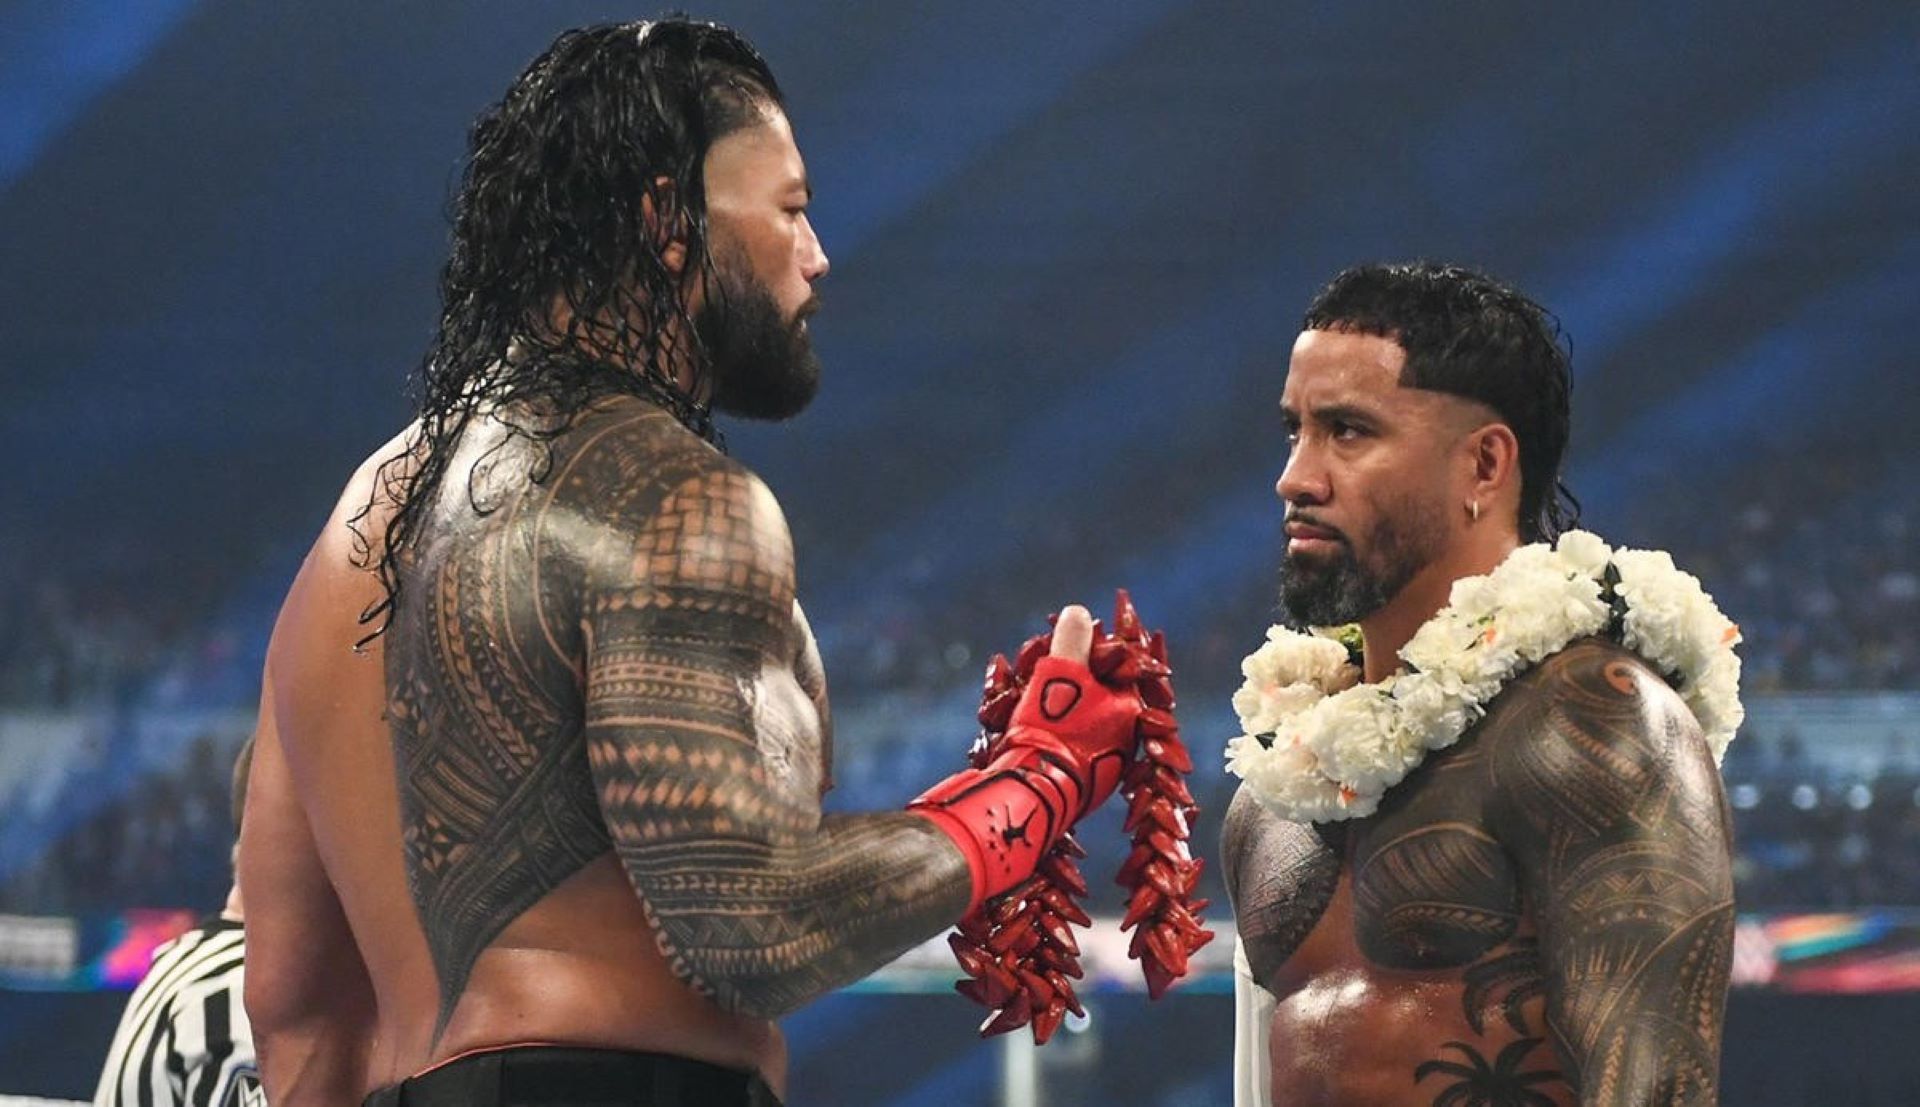 Roman Reigns and Jey Uso faced off in Tribal Combat at SummerSlam 2022 (Credit: WWE.com)